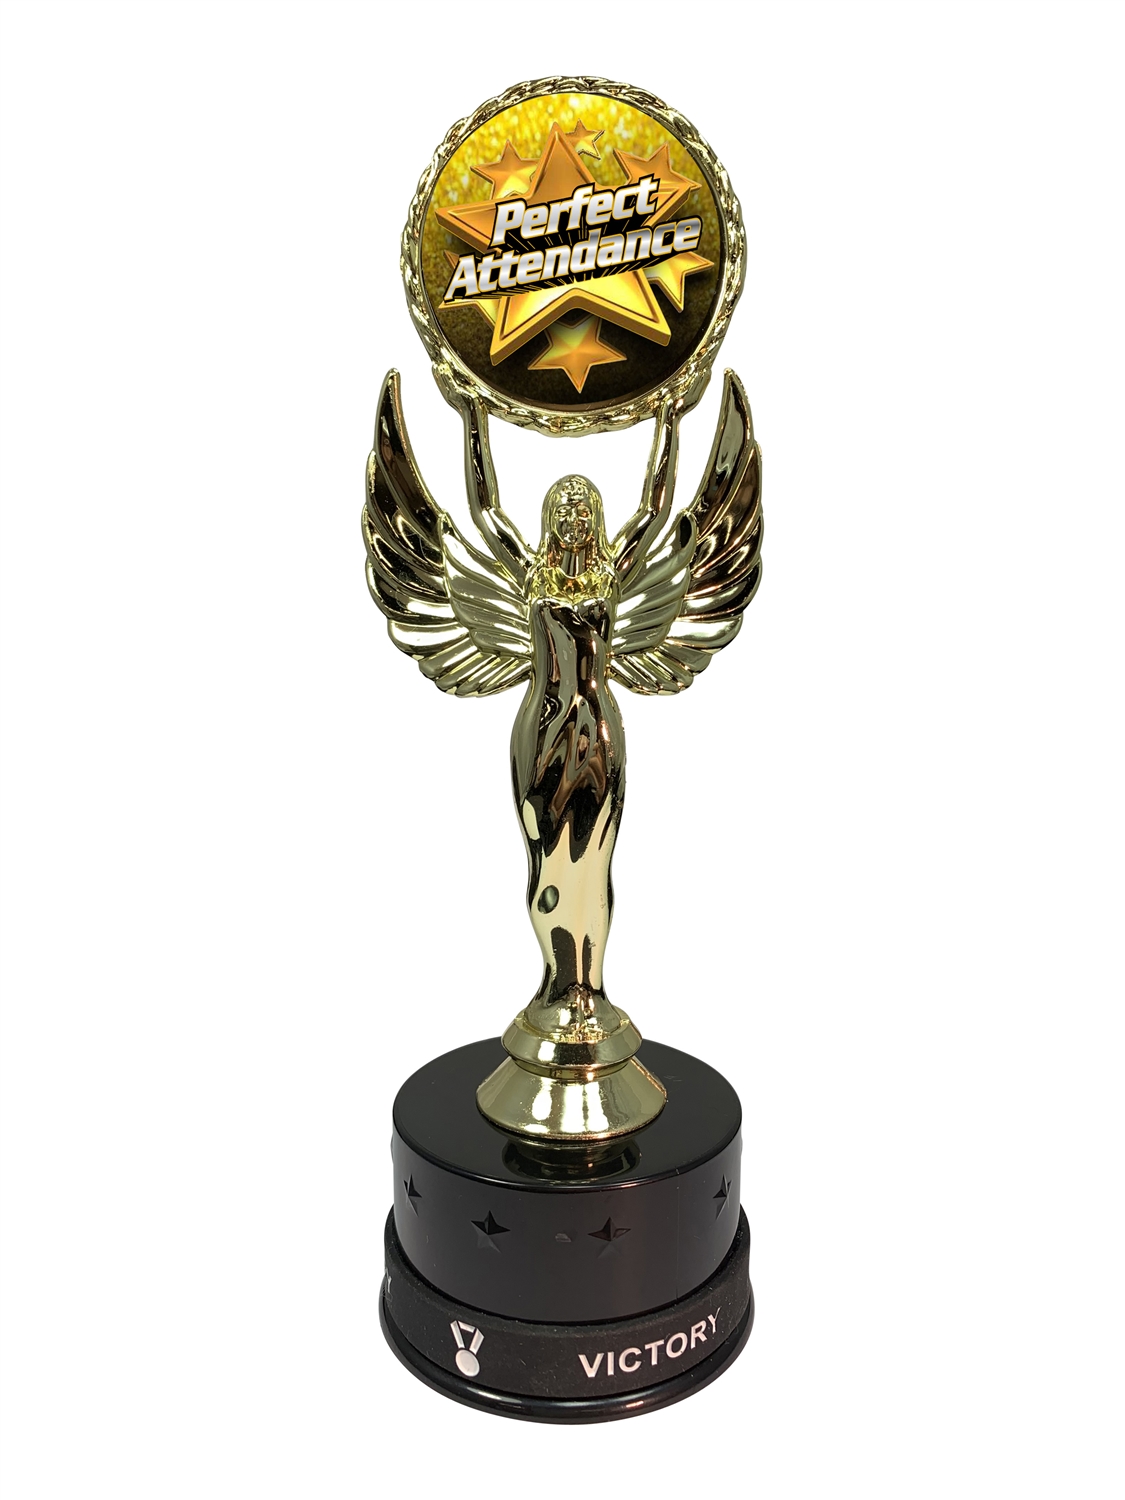 Pefect Attendance Victory Wristband Trophy